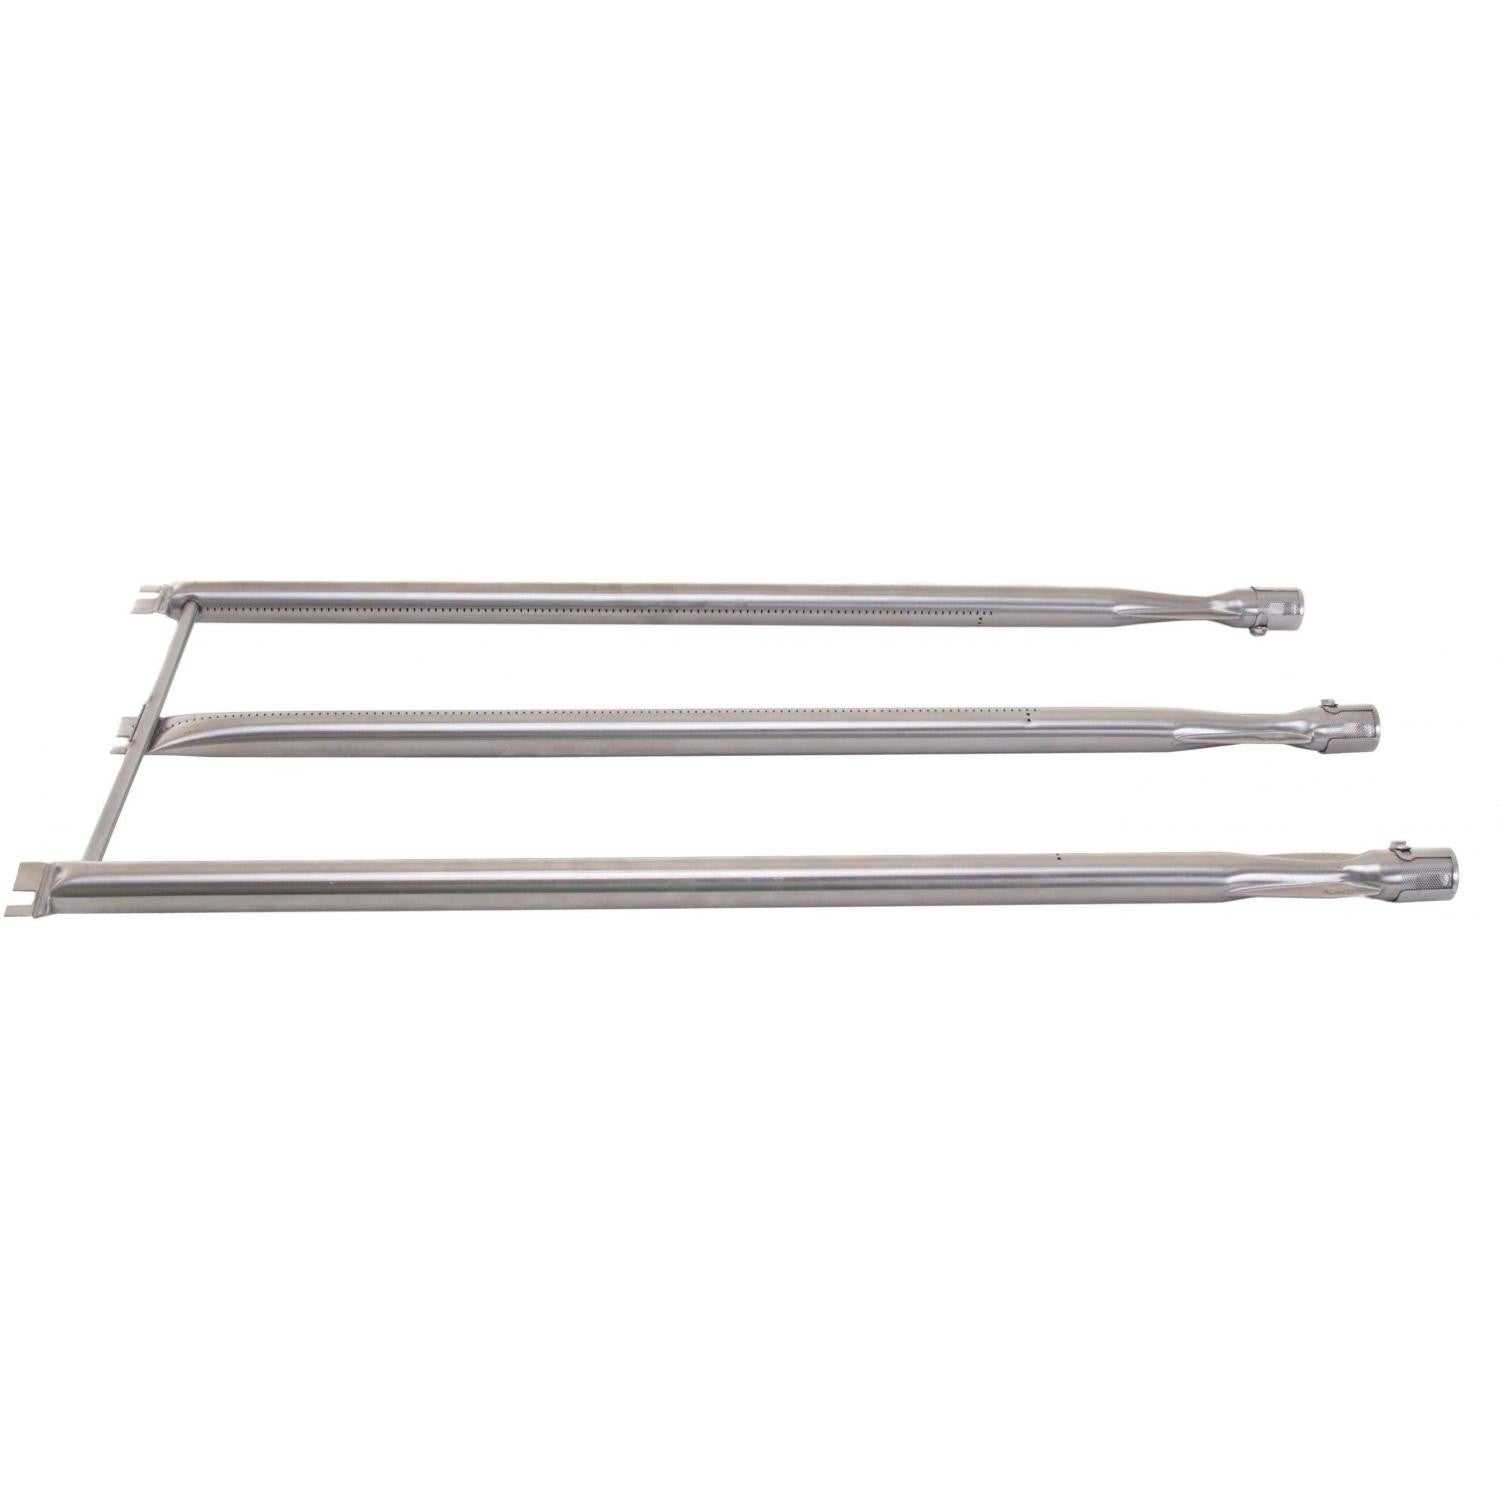 Weber 7508 Replacement Burner Set For Genesis Silver B/C | Available to order in-store or online with Barbecues Galore. Check out any of our 5 locations for all of your Bbq, patio, cover, parts or accessories. Located in Burlington, Oakville, Etobicoke & Calgary.